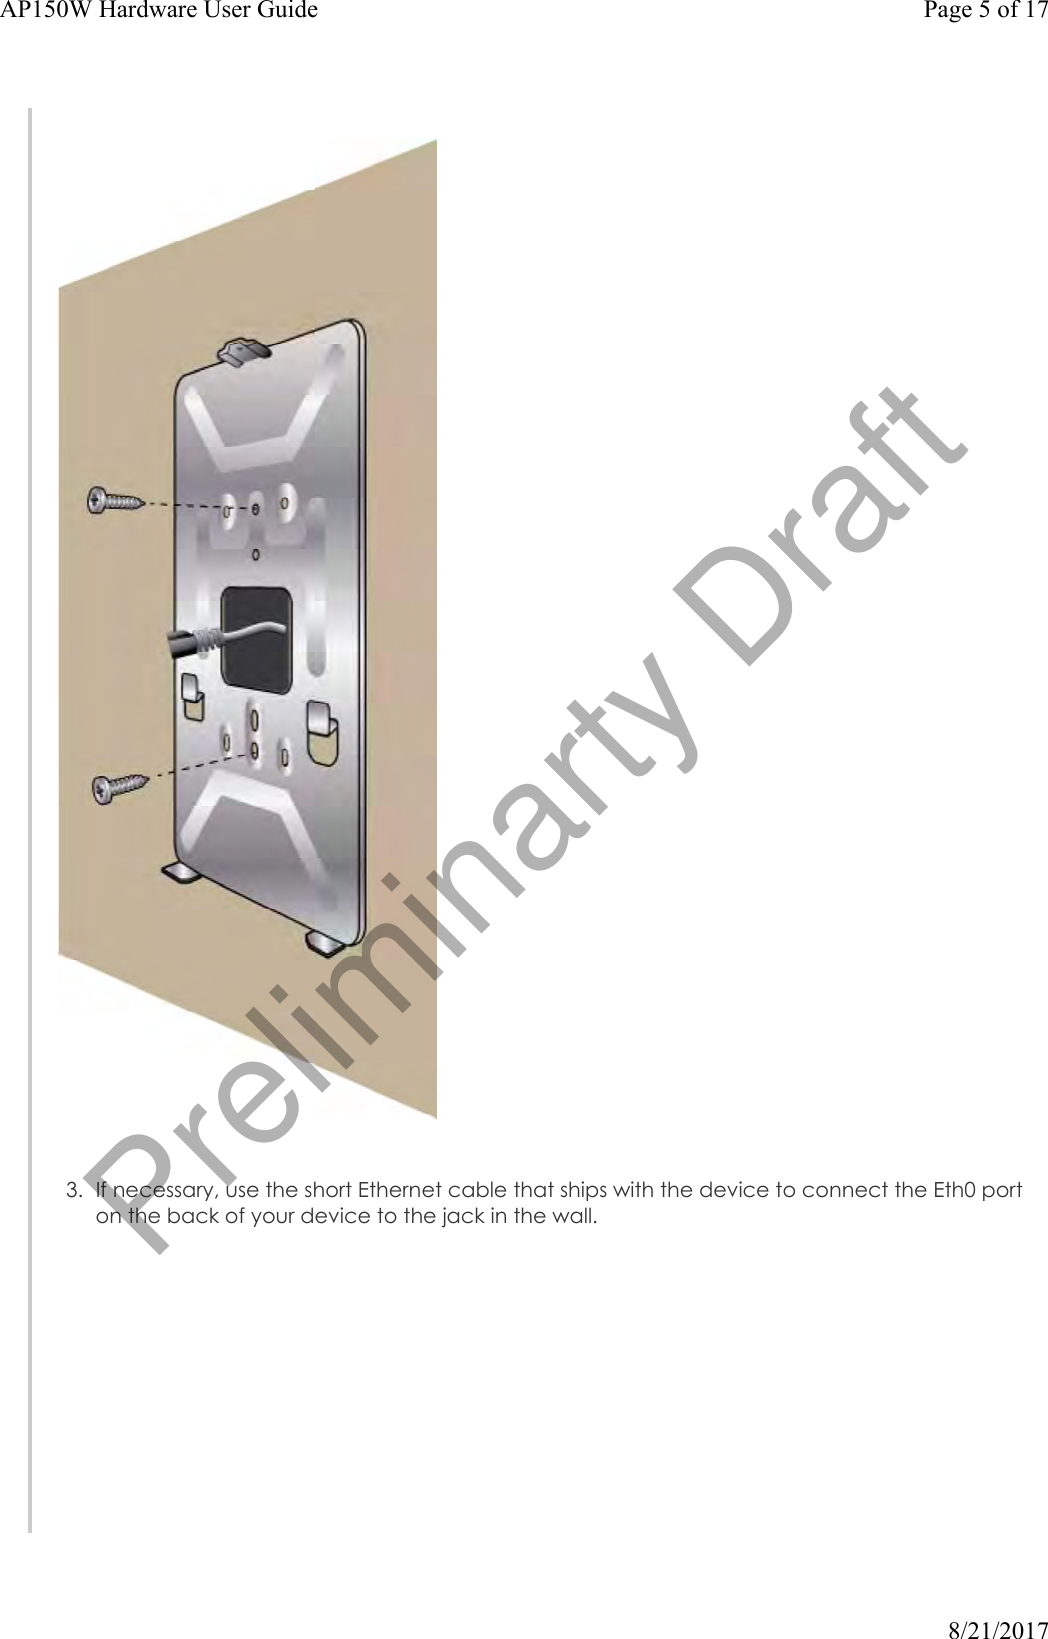 3. If necessary, use the short Ethernet cable that ships with the device to connect the Eth0 porton the back of your device to the jack in the wall.Page 5 of 17AP150W Hardware User Guide8/21/2017Preliminarty Draft